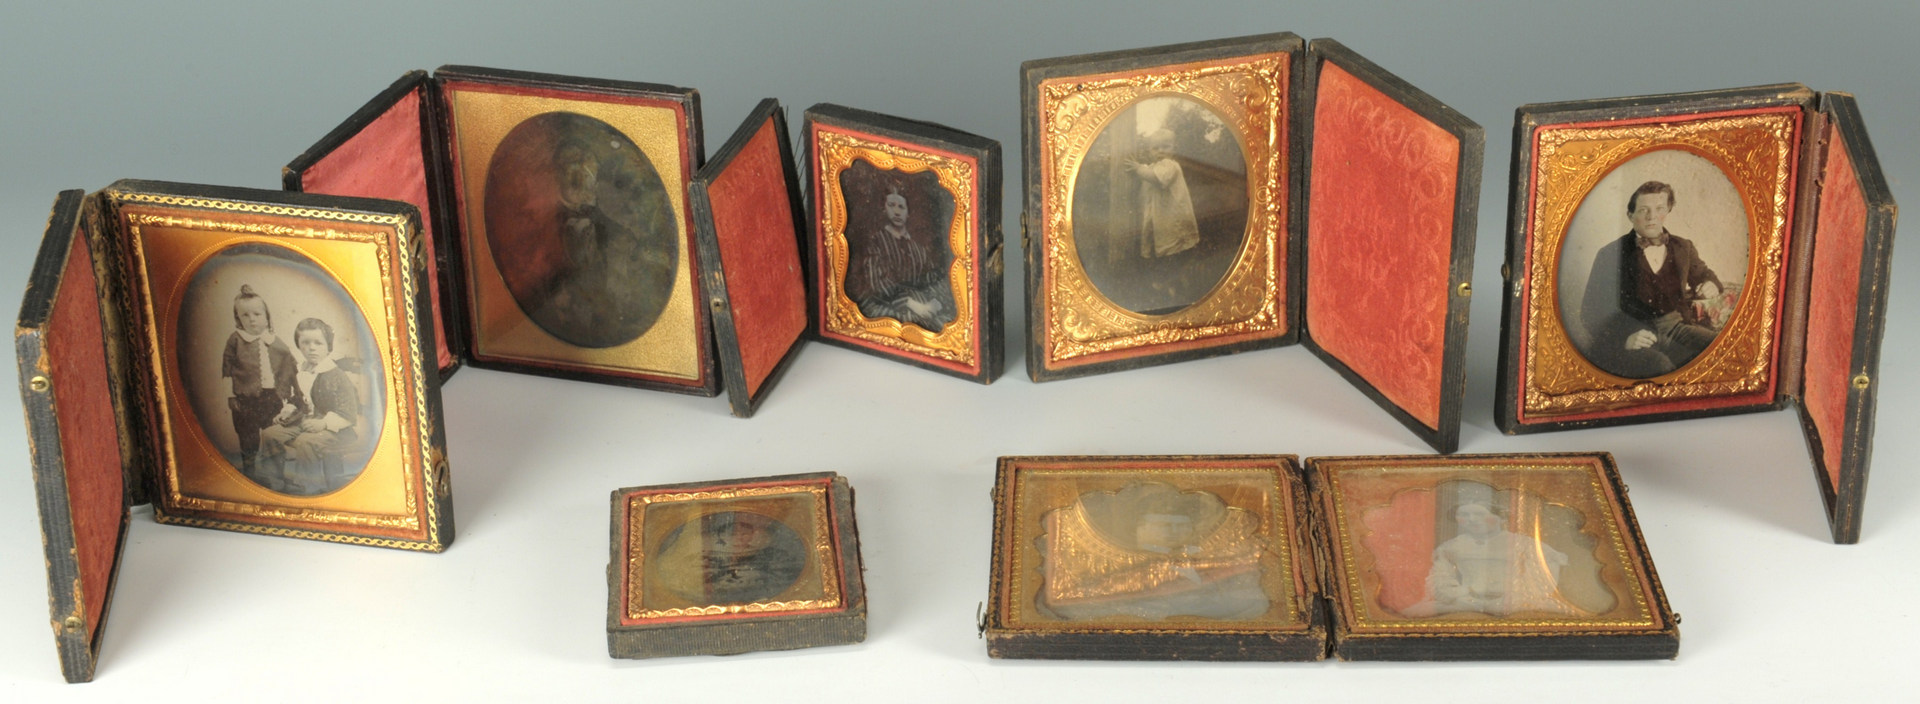 Lot 256: Large Grouping of Decorative Items